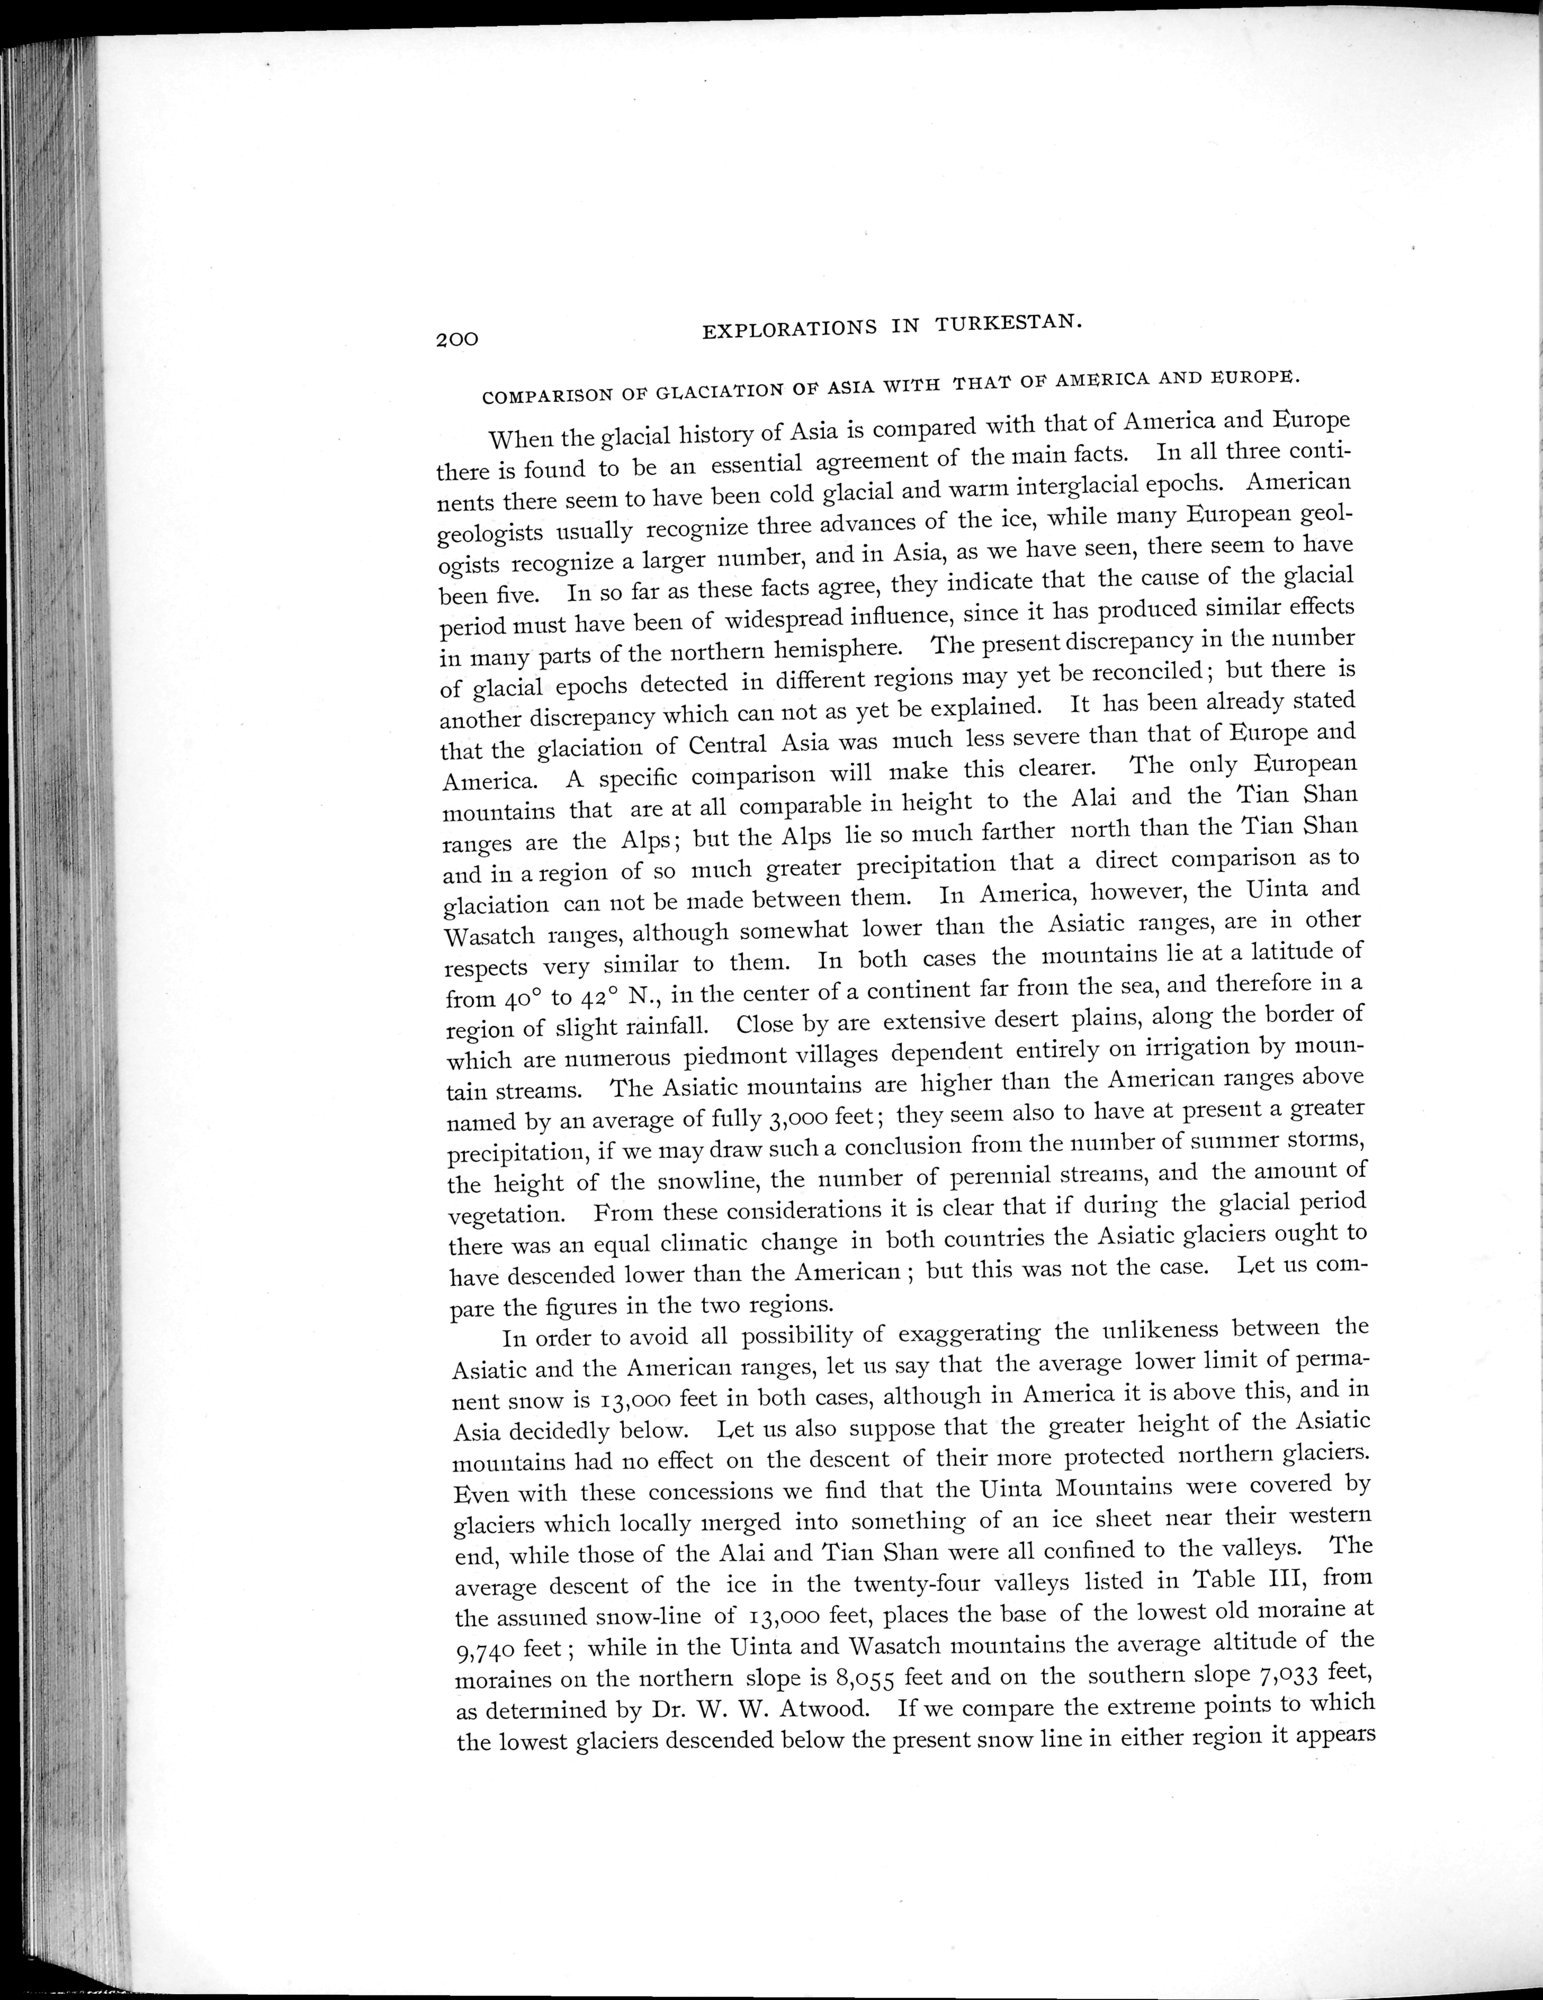 Explorations in Turkestan 1903 : vol.1 / Page 230 (Grayscale High Resolution Image)